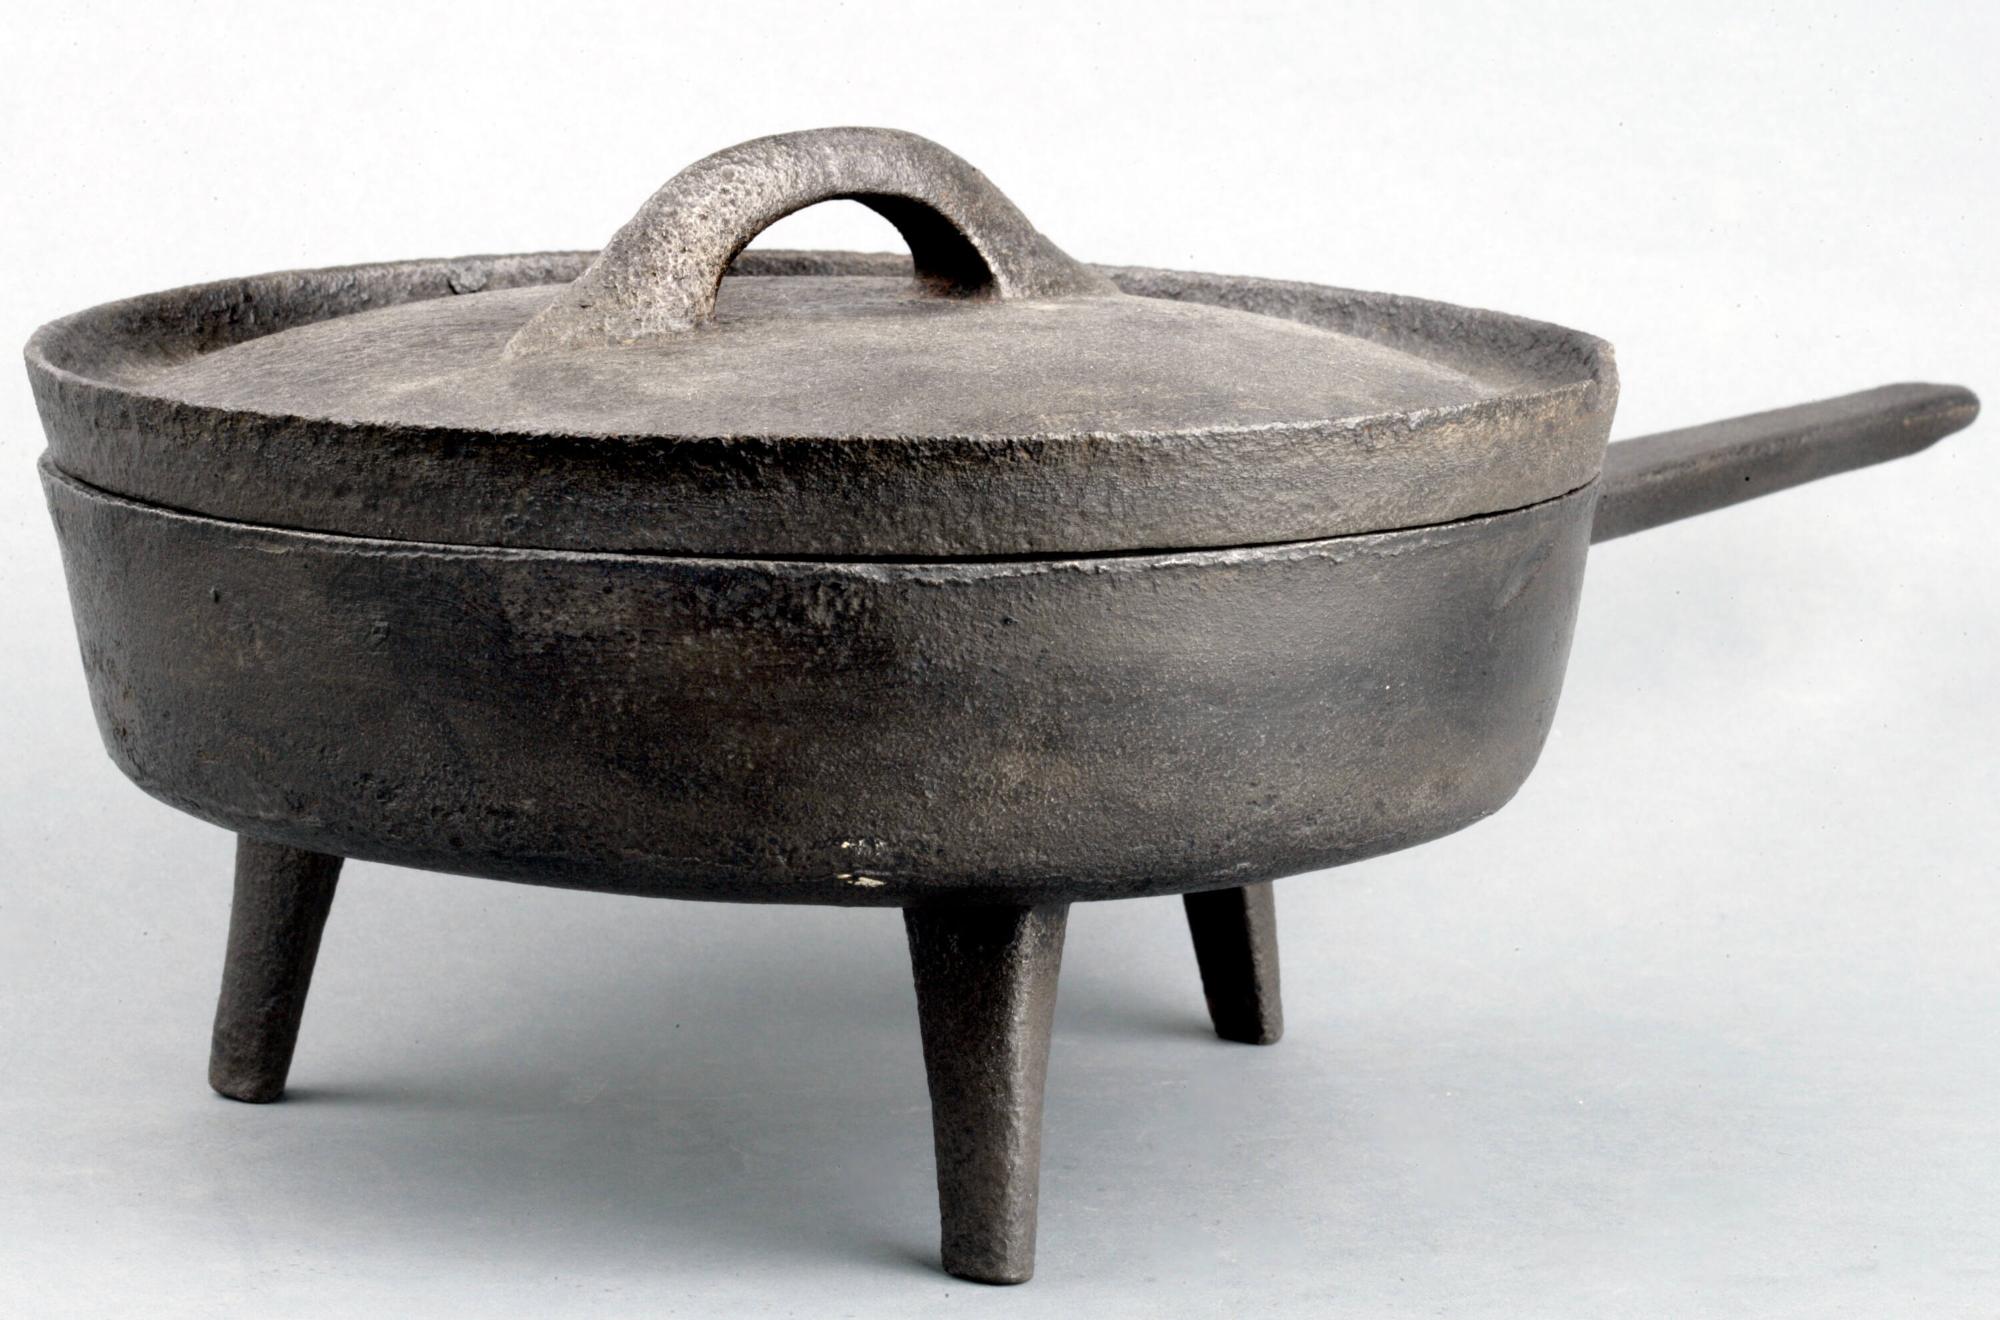 Spider skillet with lid – Works – New-York Historical Society